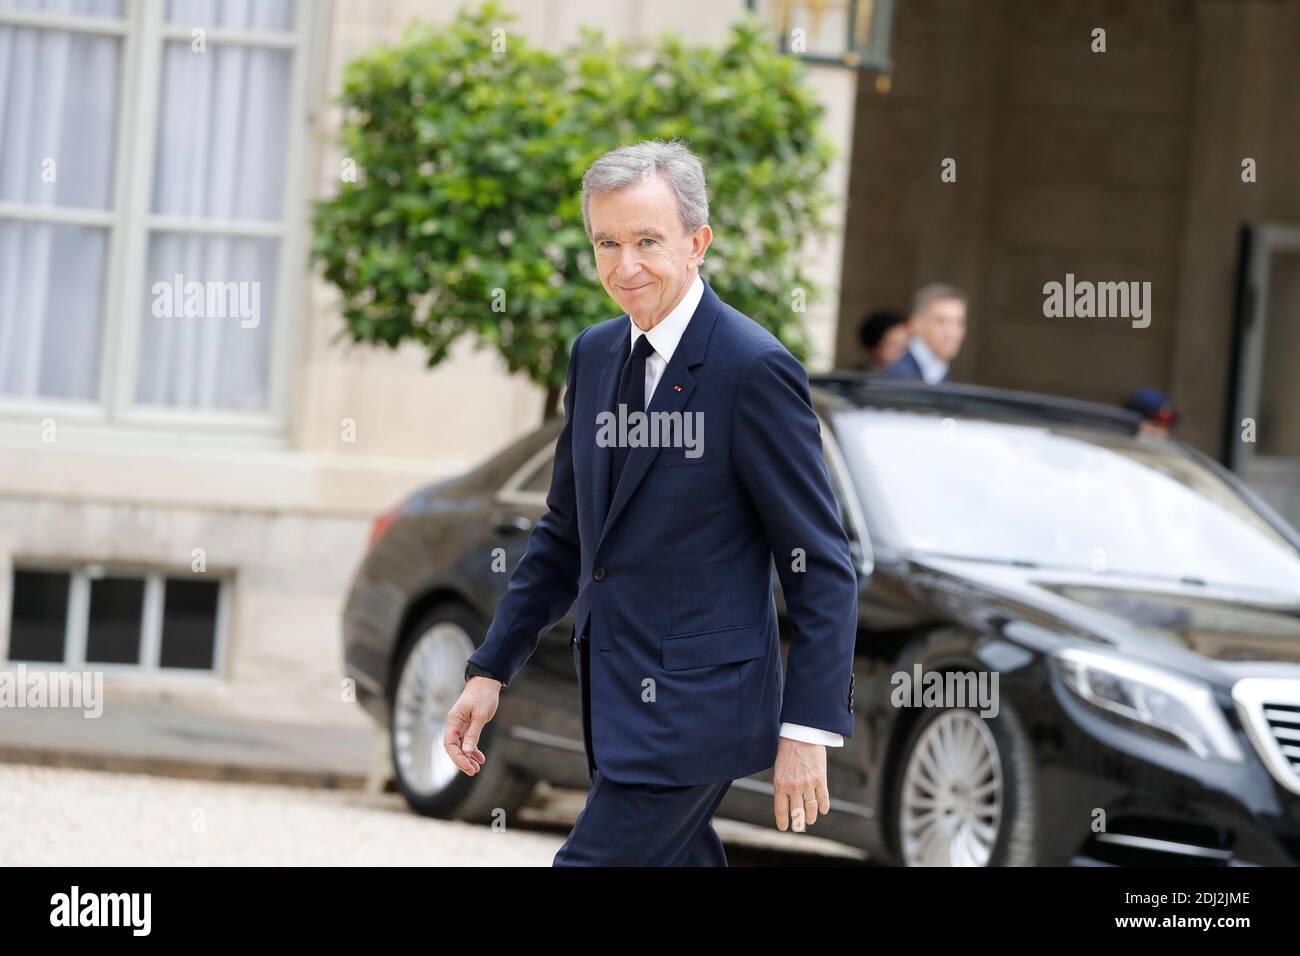 LVMH Chairman and CEO Bernard Arnault arriving at the Elysee Palace for a  luncheon with stakeholders of the digital sector hosted by President  Francois Hollande as part of the Viva Technology Startup